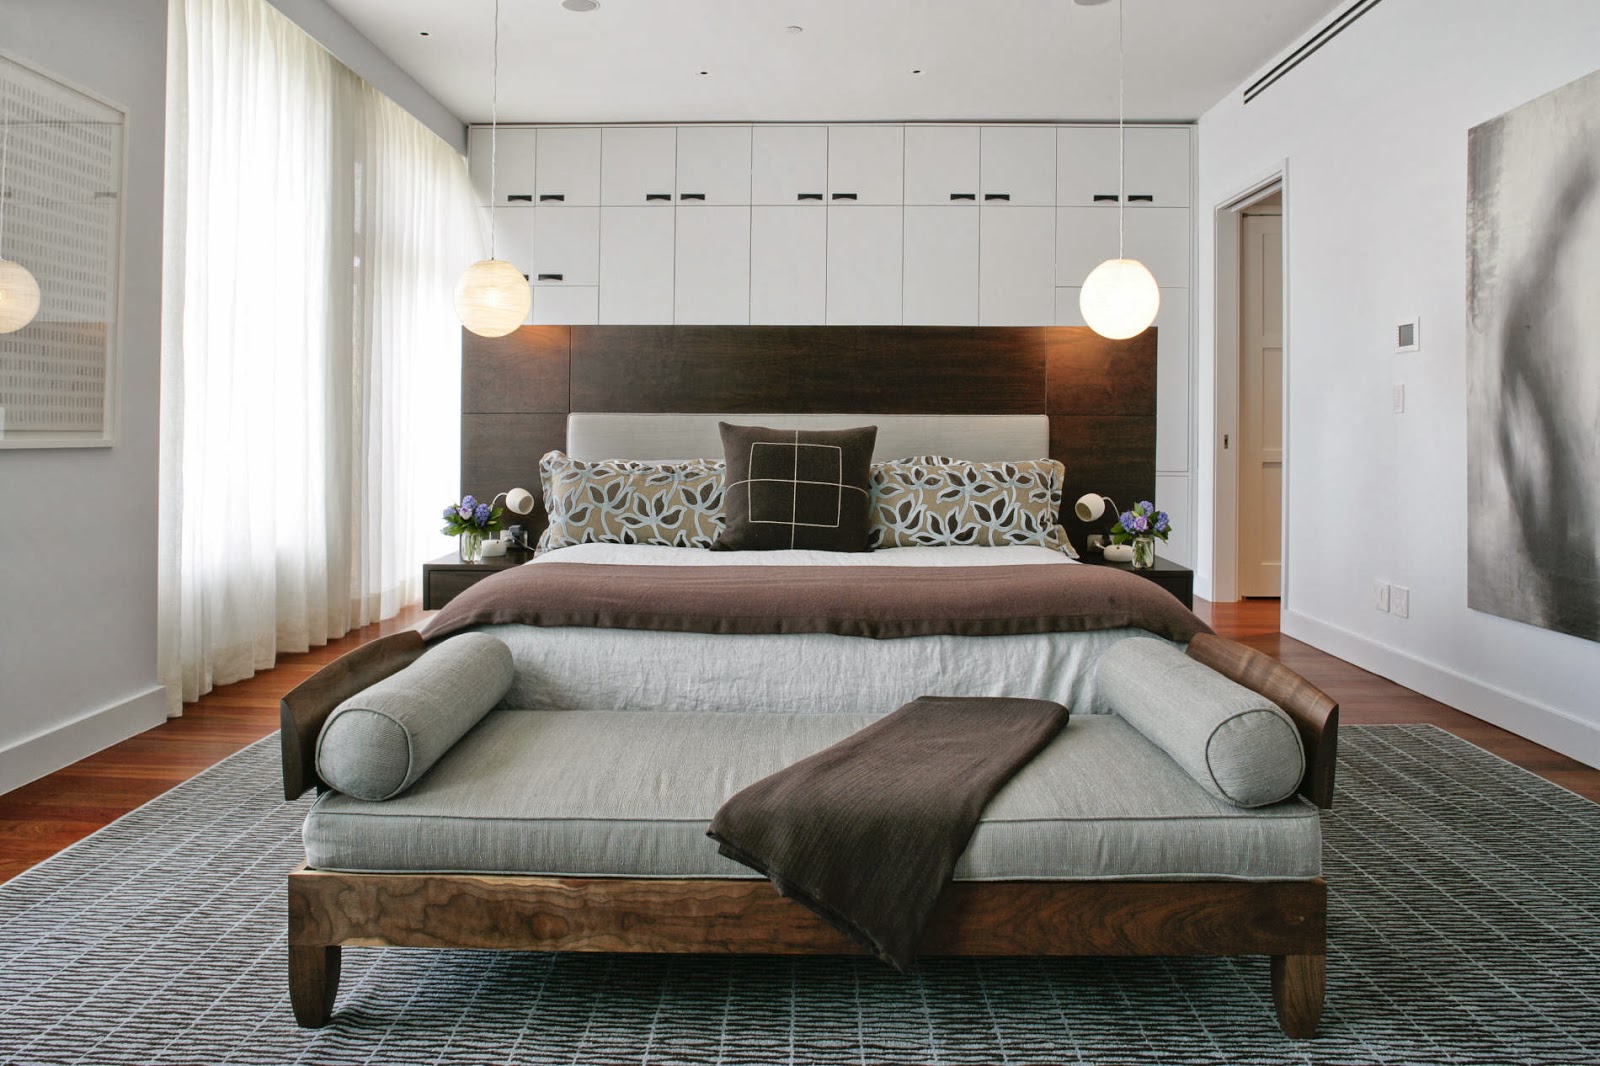 luxury master bedroom with a sofa at the foot of the bed as one of the eclectic elements in the space (1)